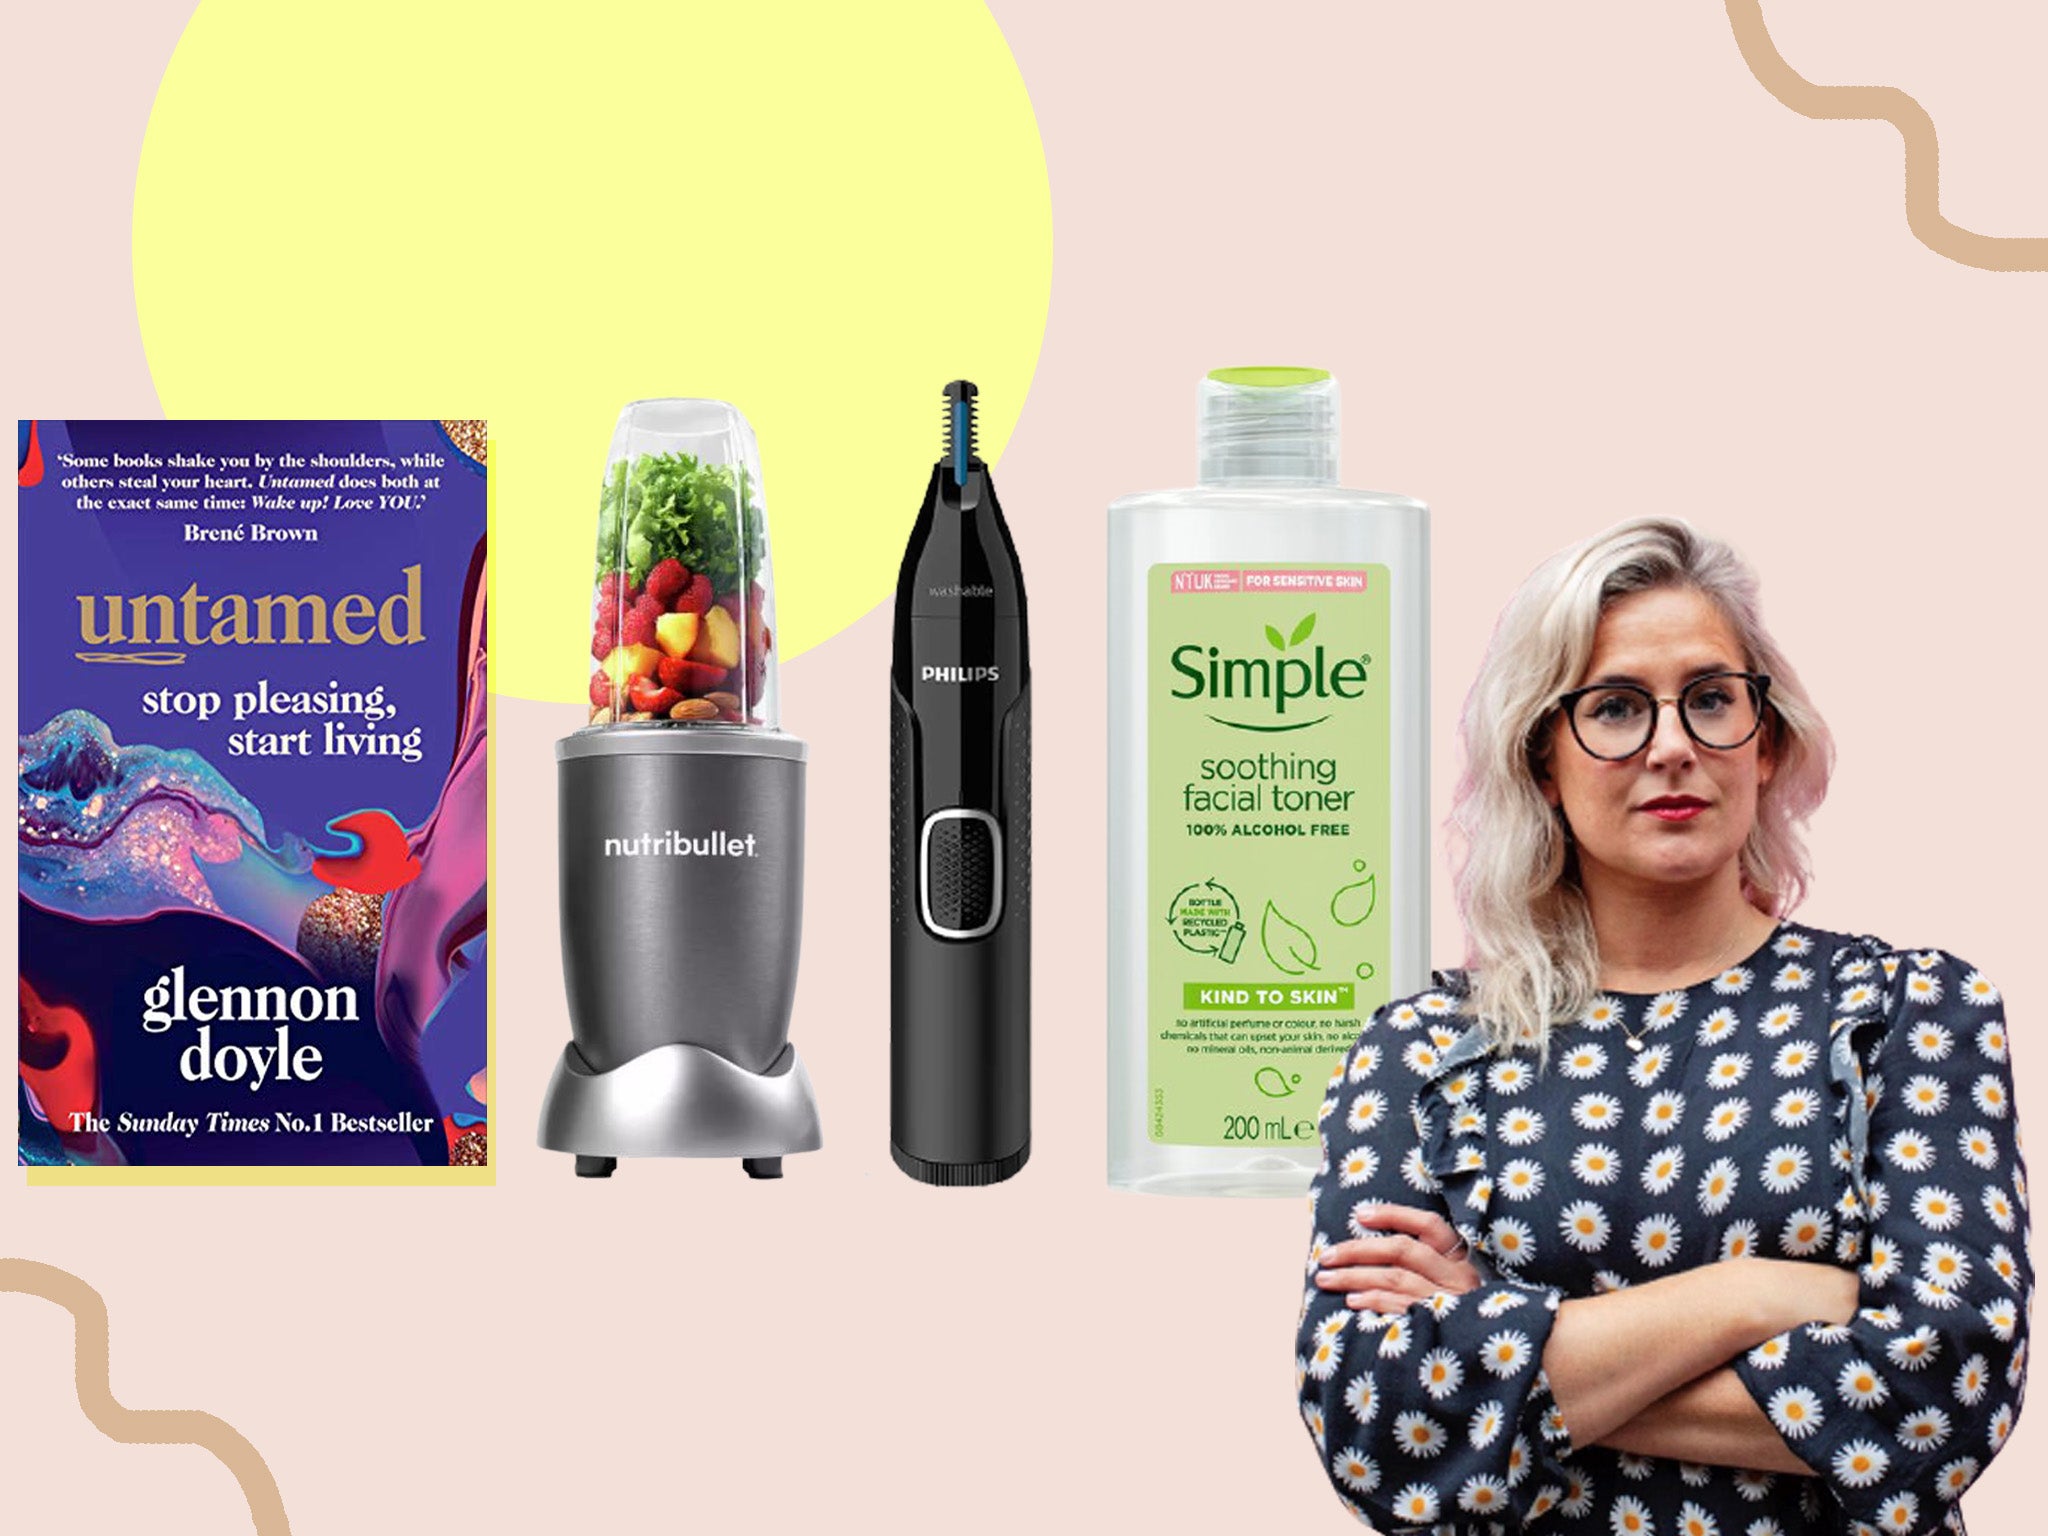 Anna swears by these affordable everyday buys